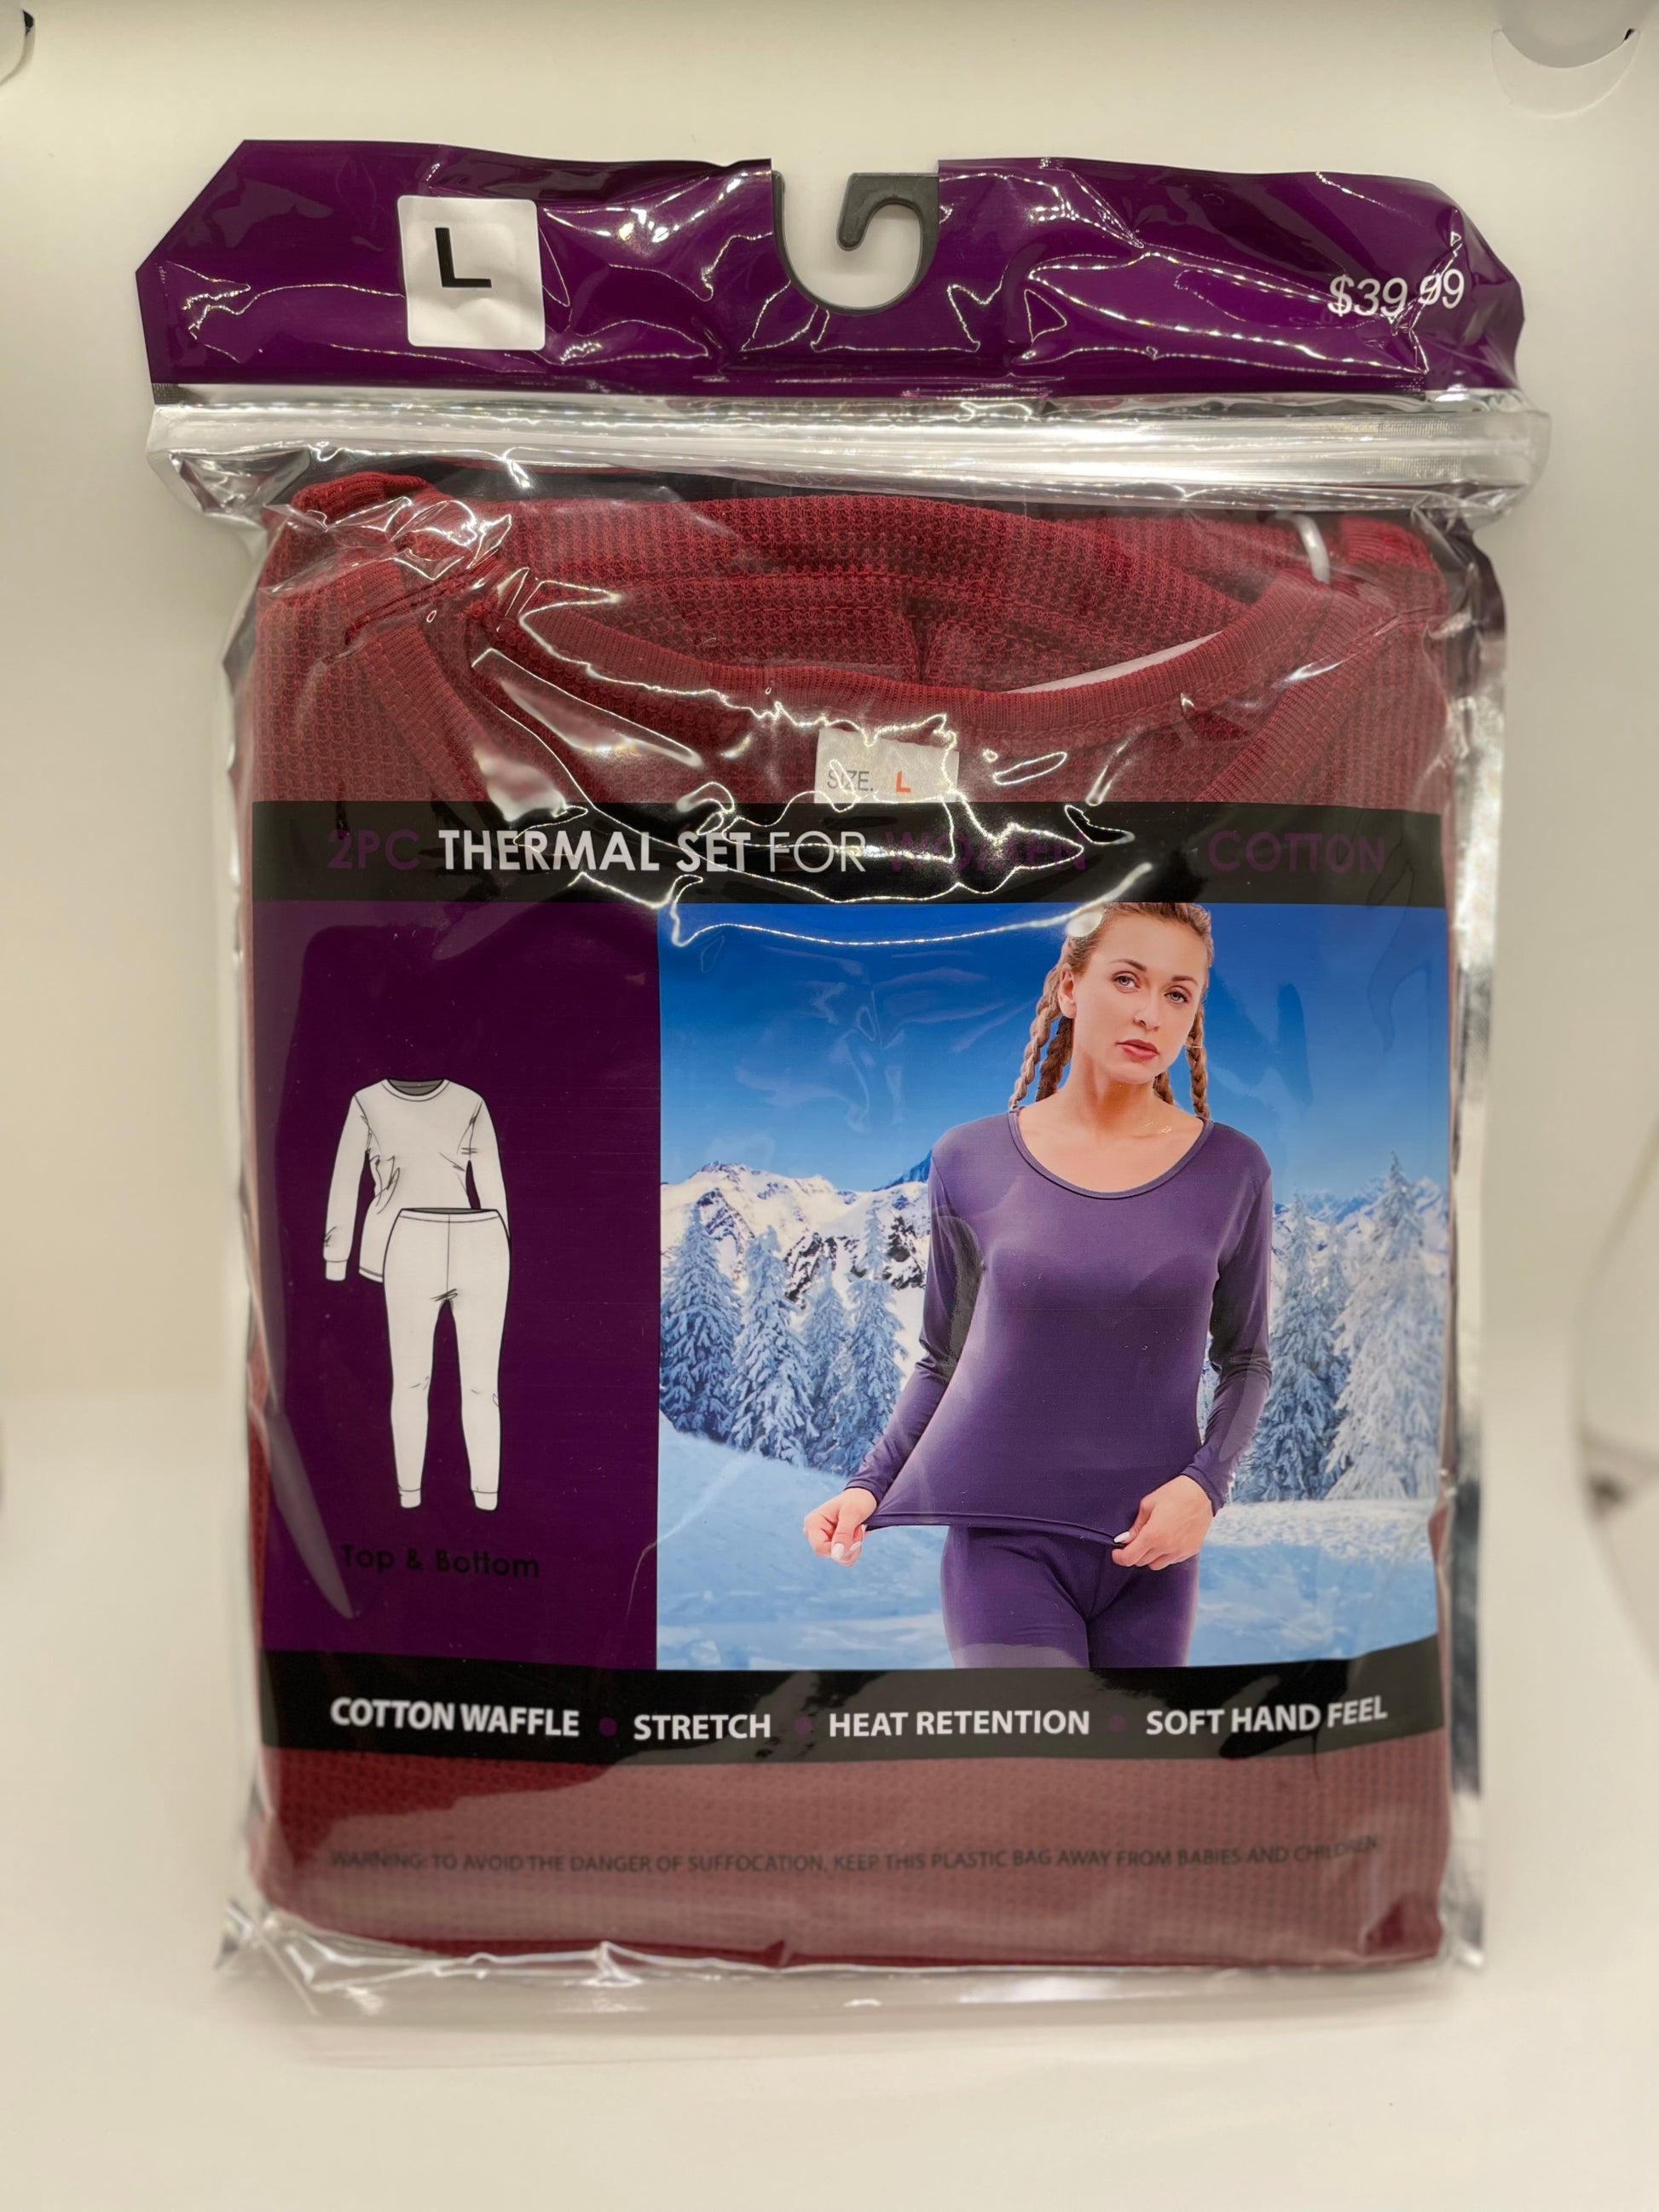  "Women's thermal underwear with a knit texture and a stretchy, form-fitting design"